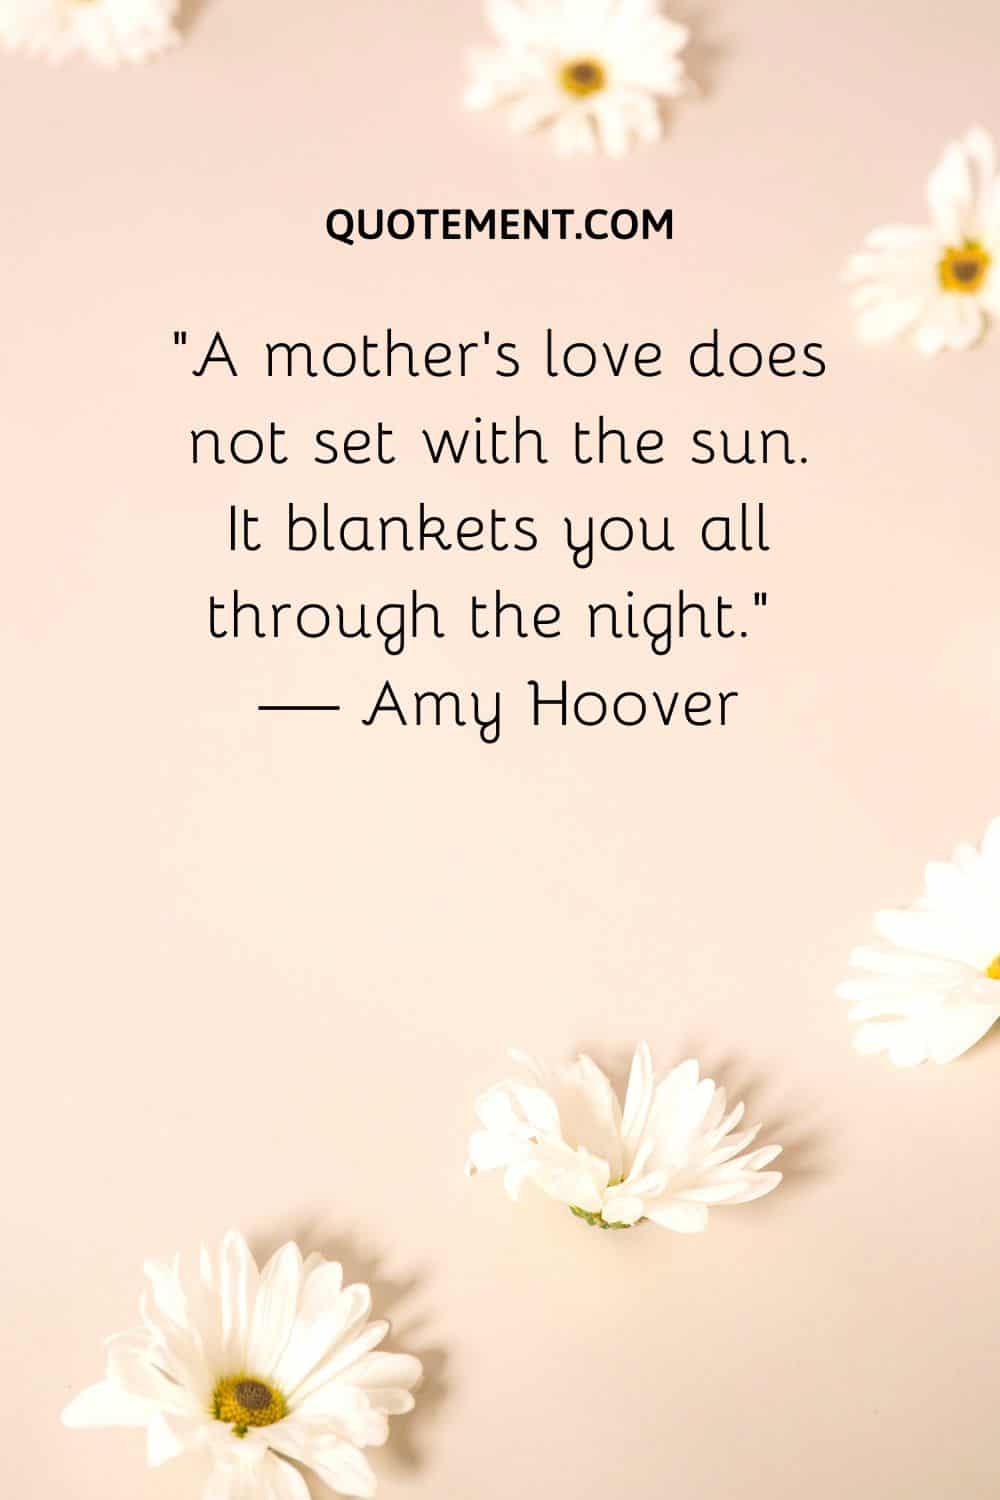 A mother’s love does not set with the sun.